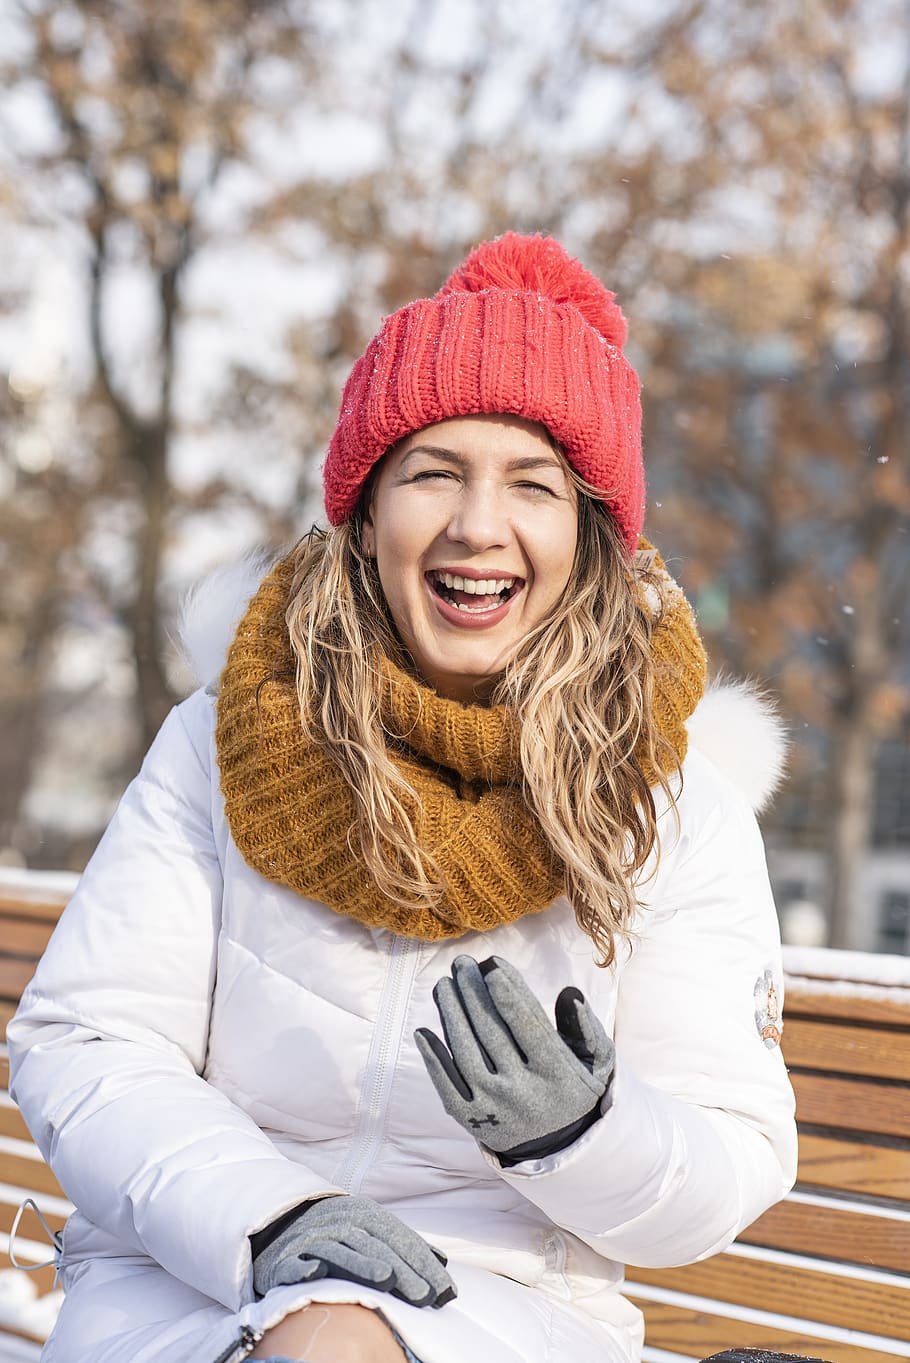 winter, red hat, laughter, portrait, happy, december, christmas, clothing, one person, hat